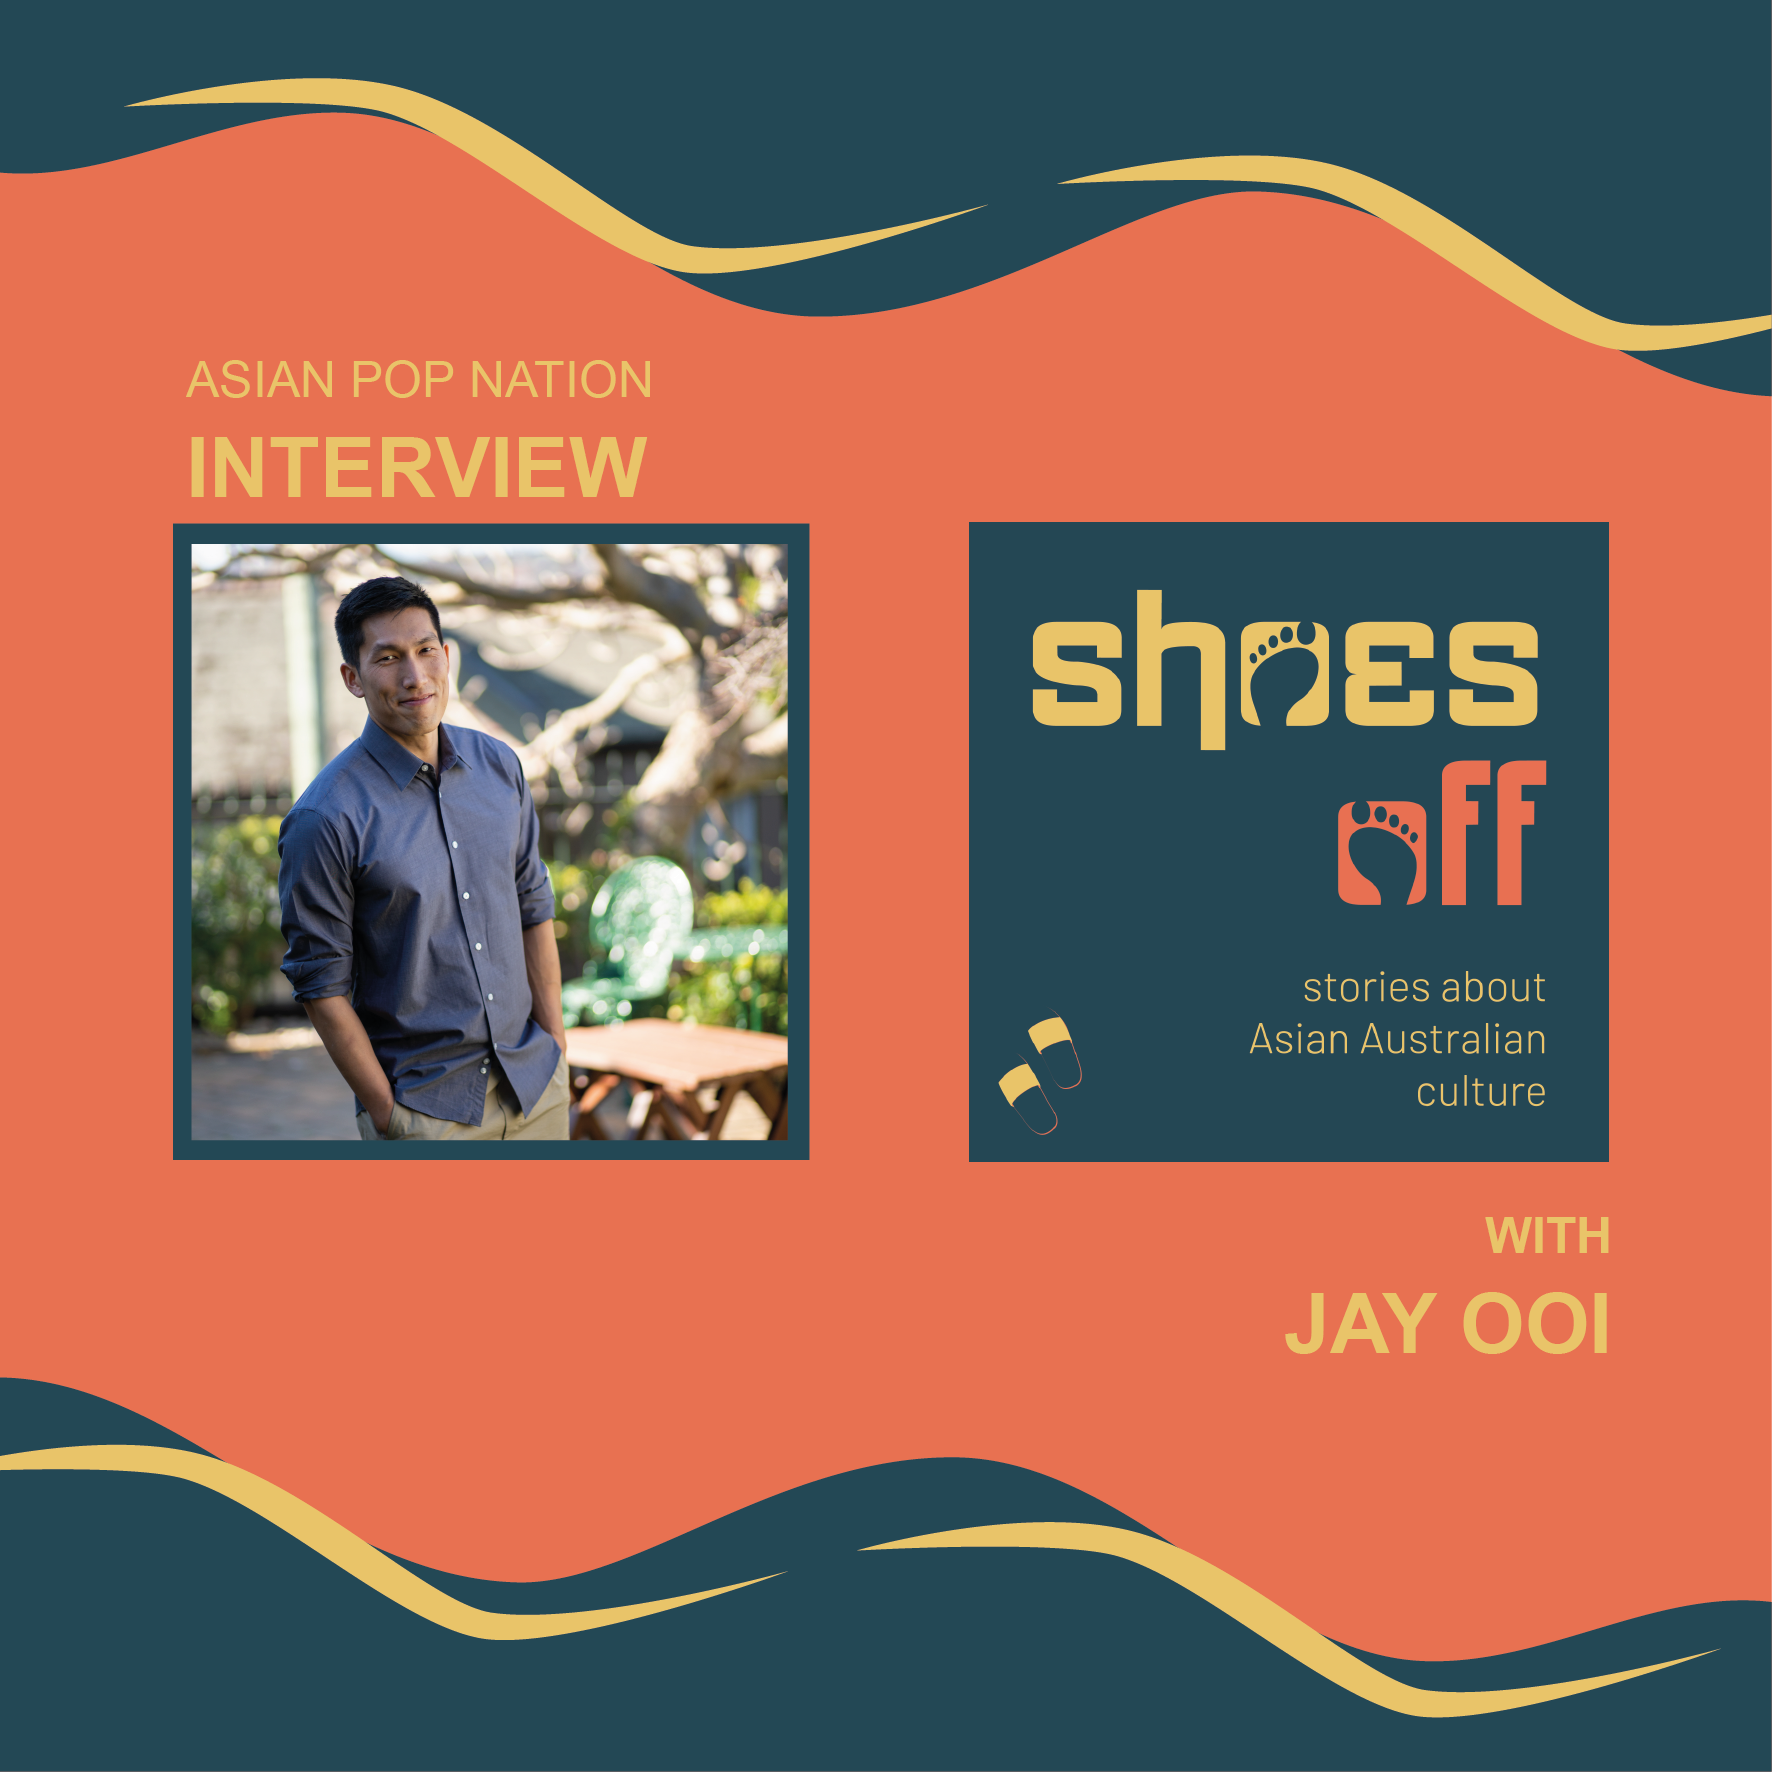 APN's Interview with Jay Ooi